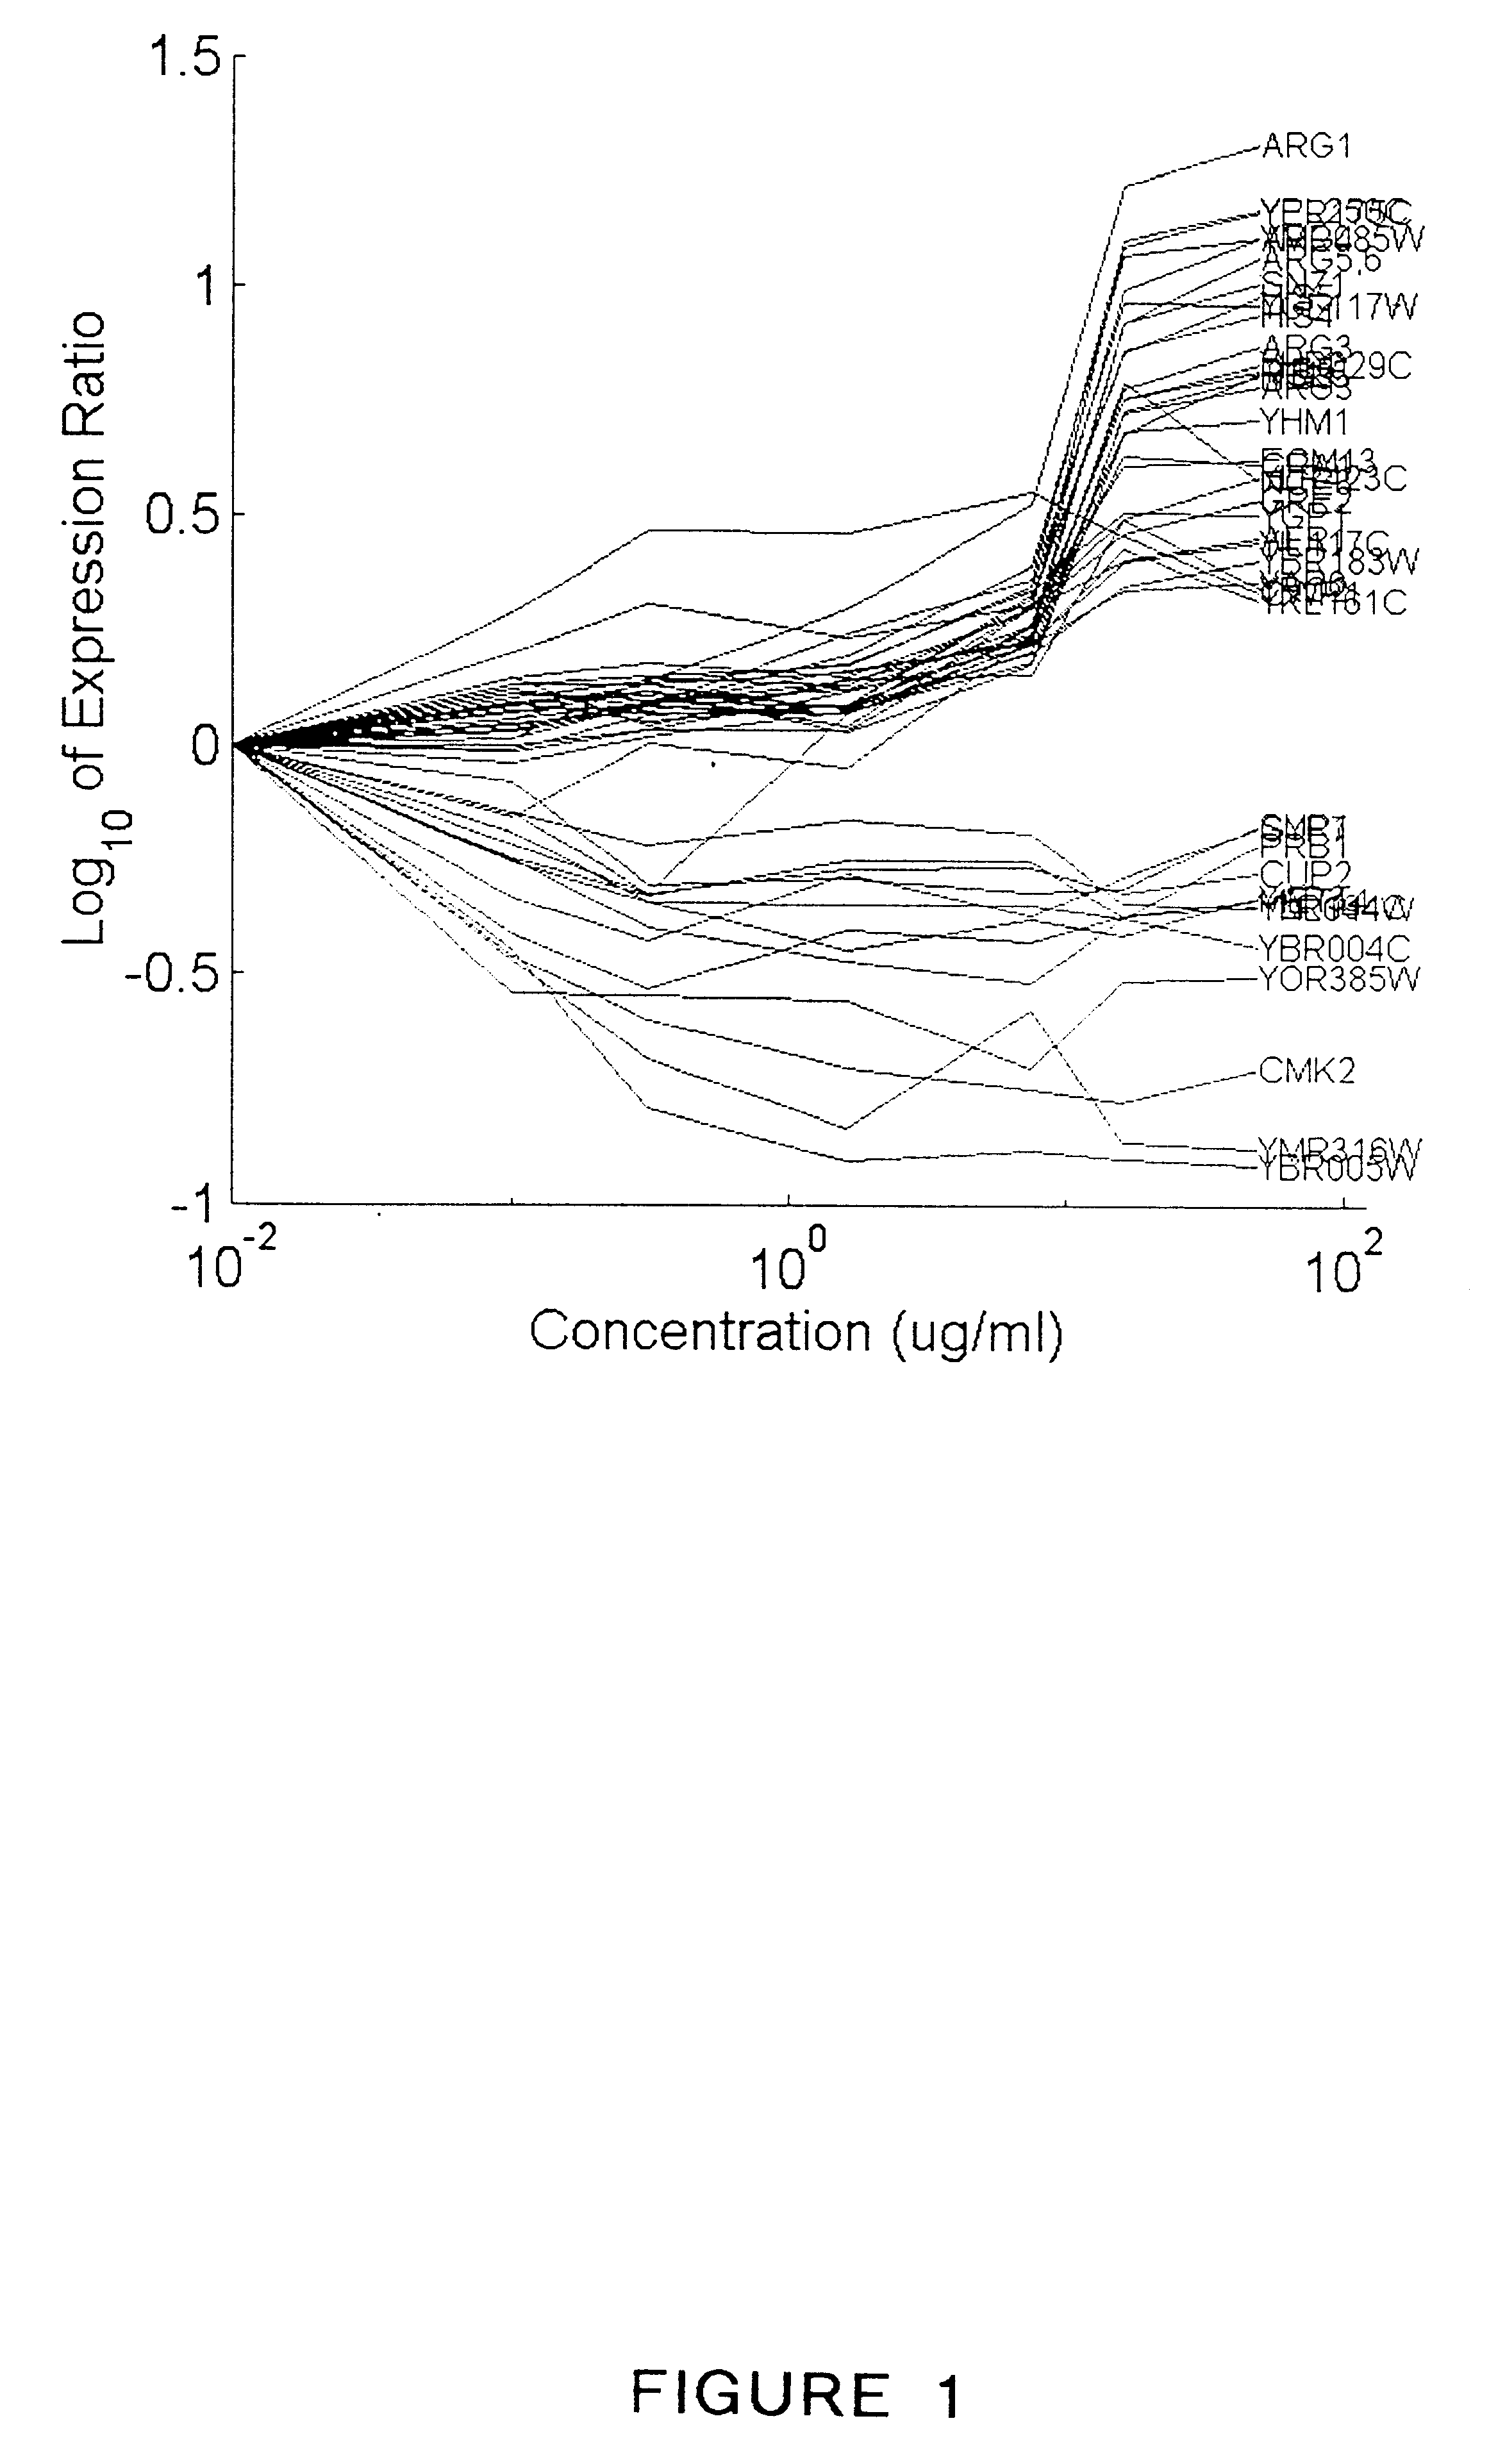 Methods for drug interaction prediction using biological response profiles